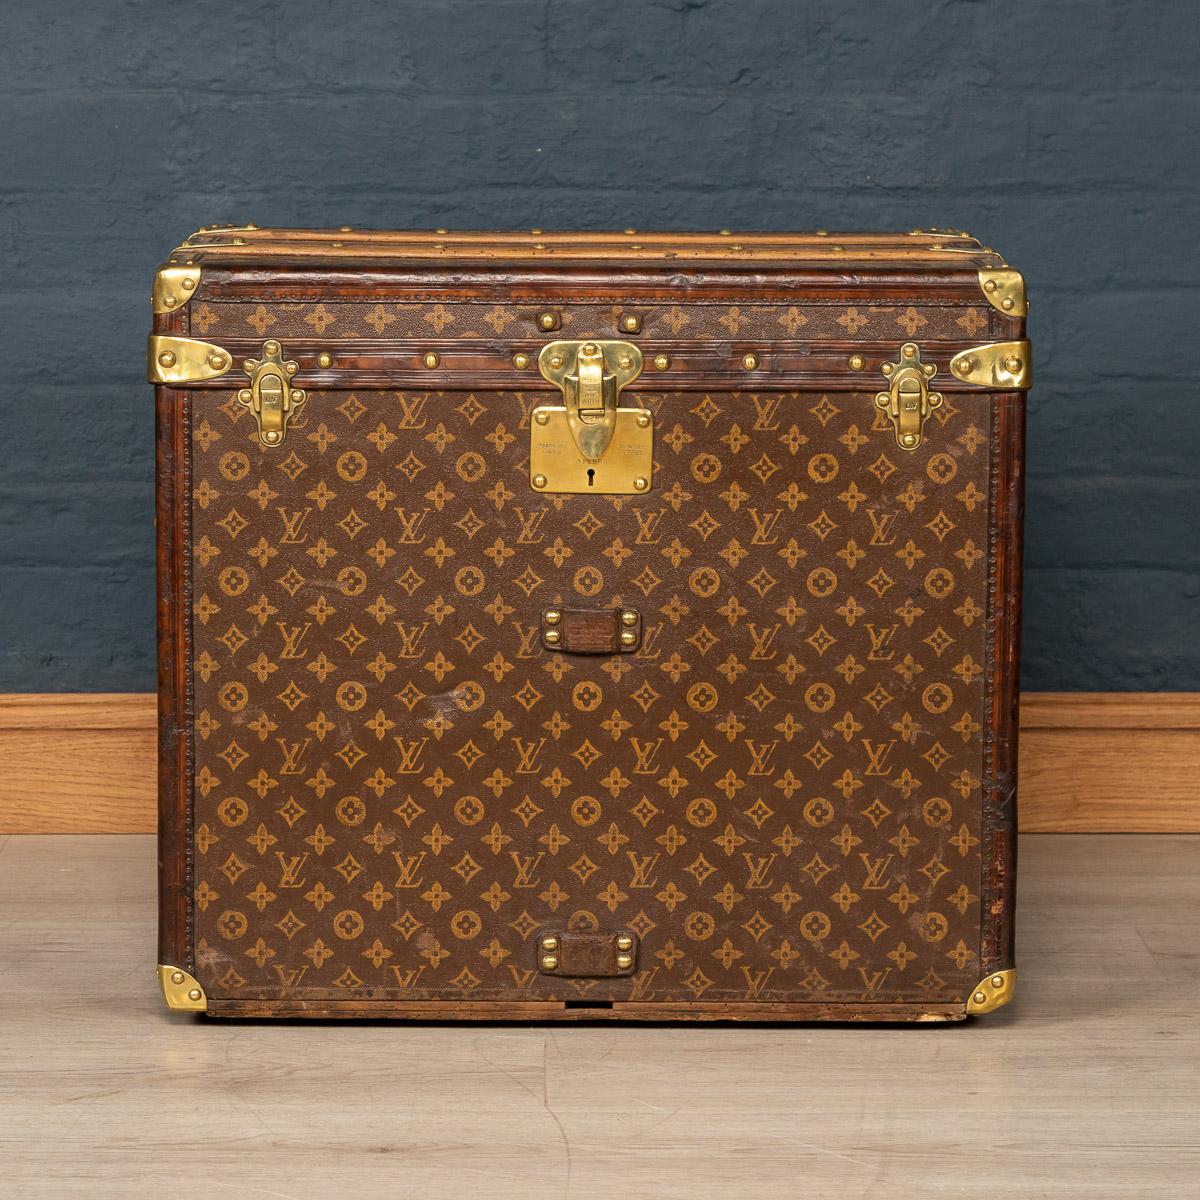 Antique 20th century stunning Louis Vuitton hat trunk in stencilled monogrammed canvas with leather and brass trim, France, circa 1910. This trunk is a must have item for any elite traveller harking back to times of passenger ships and 1st class